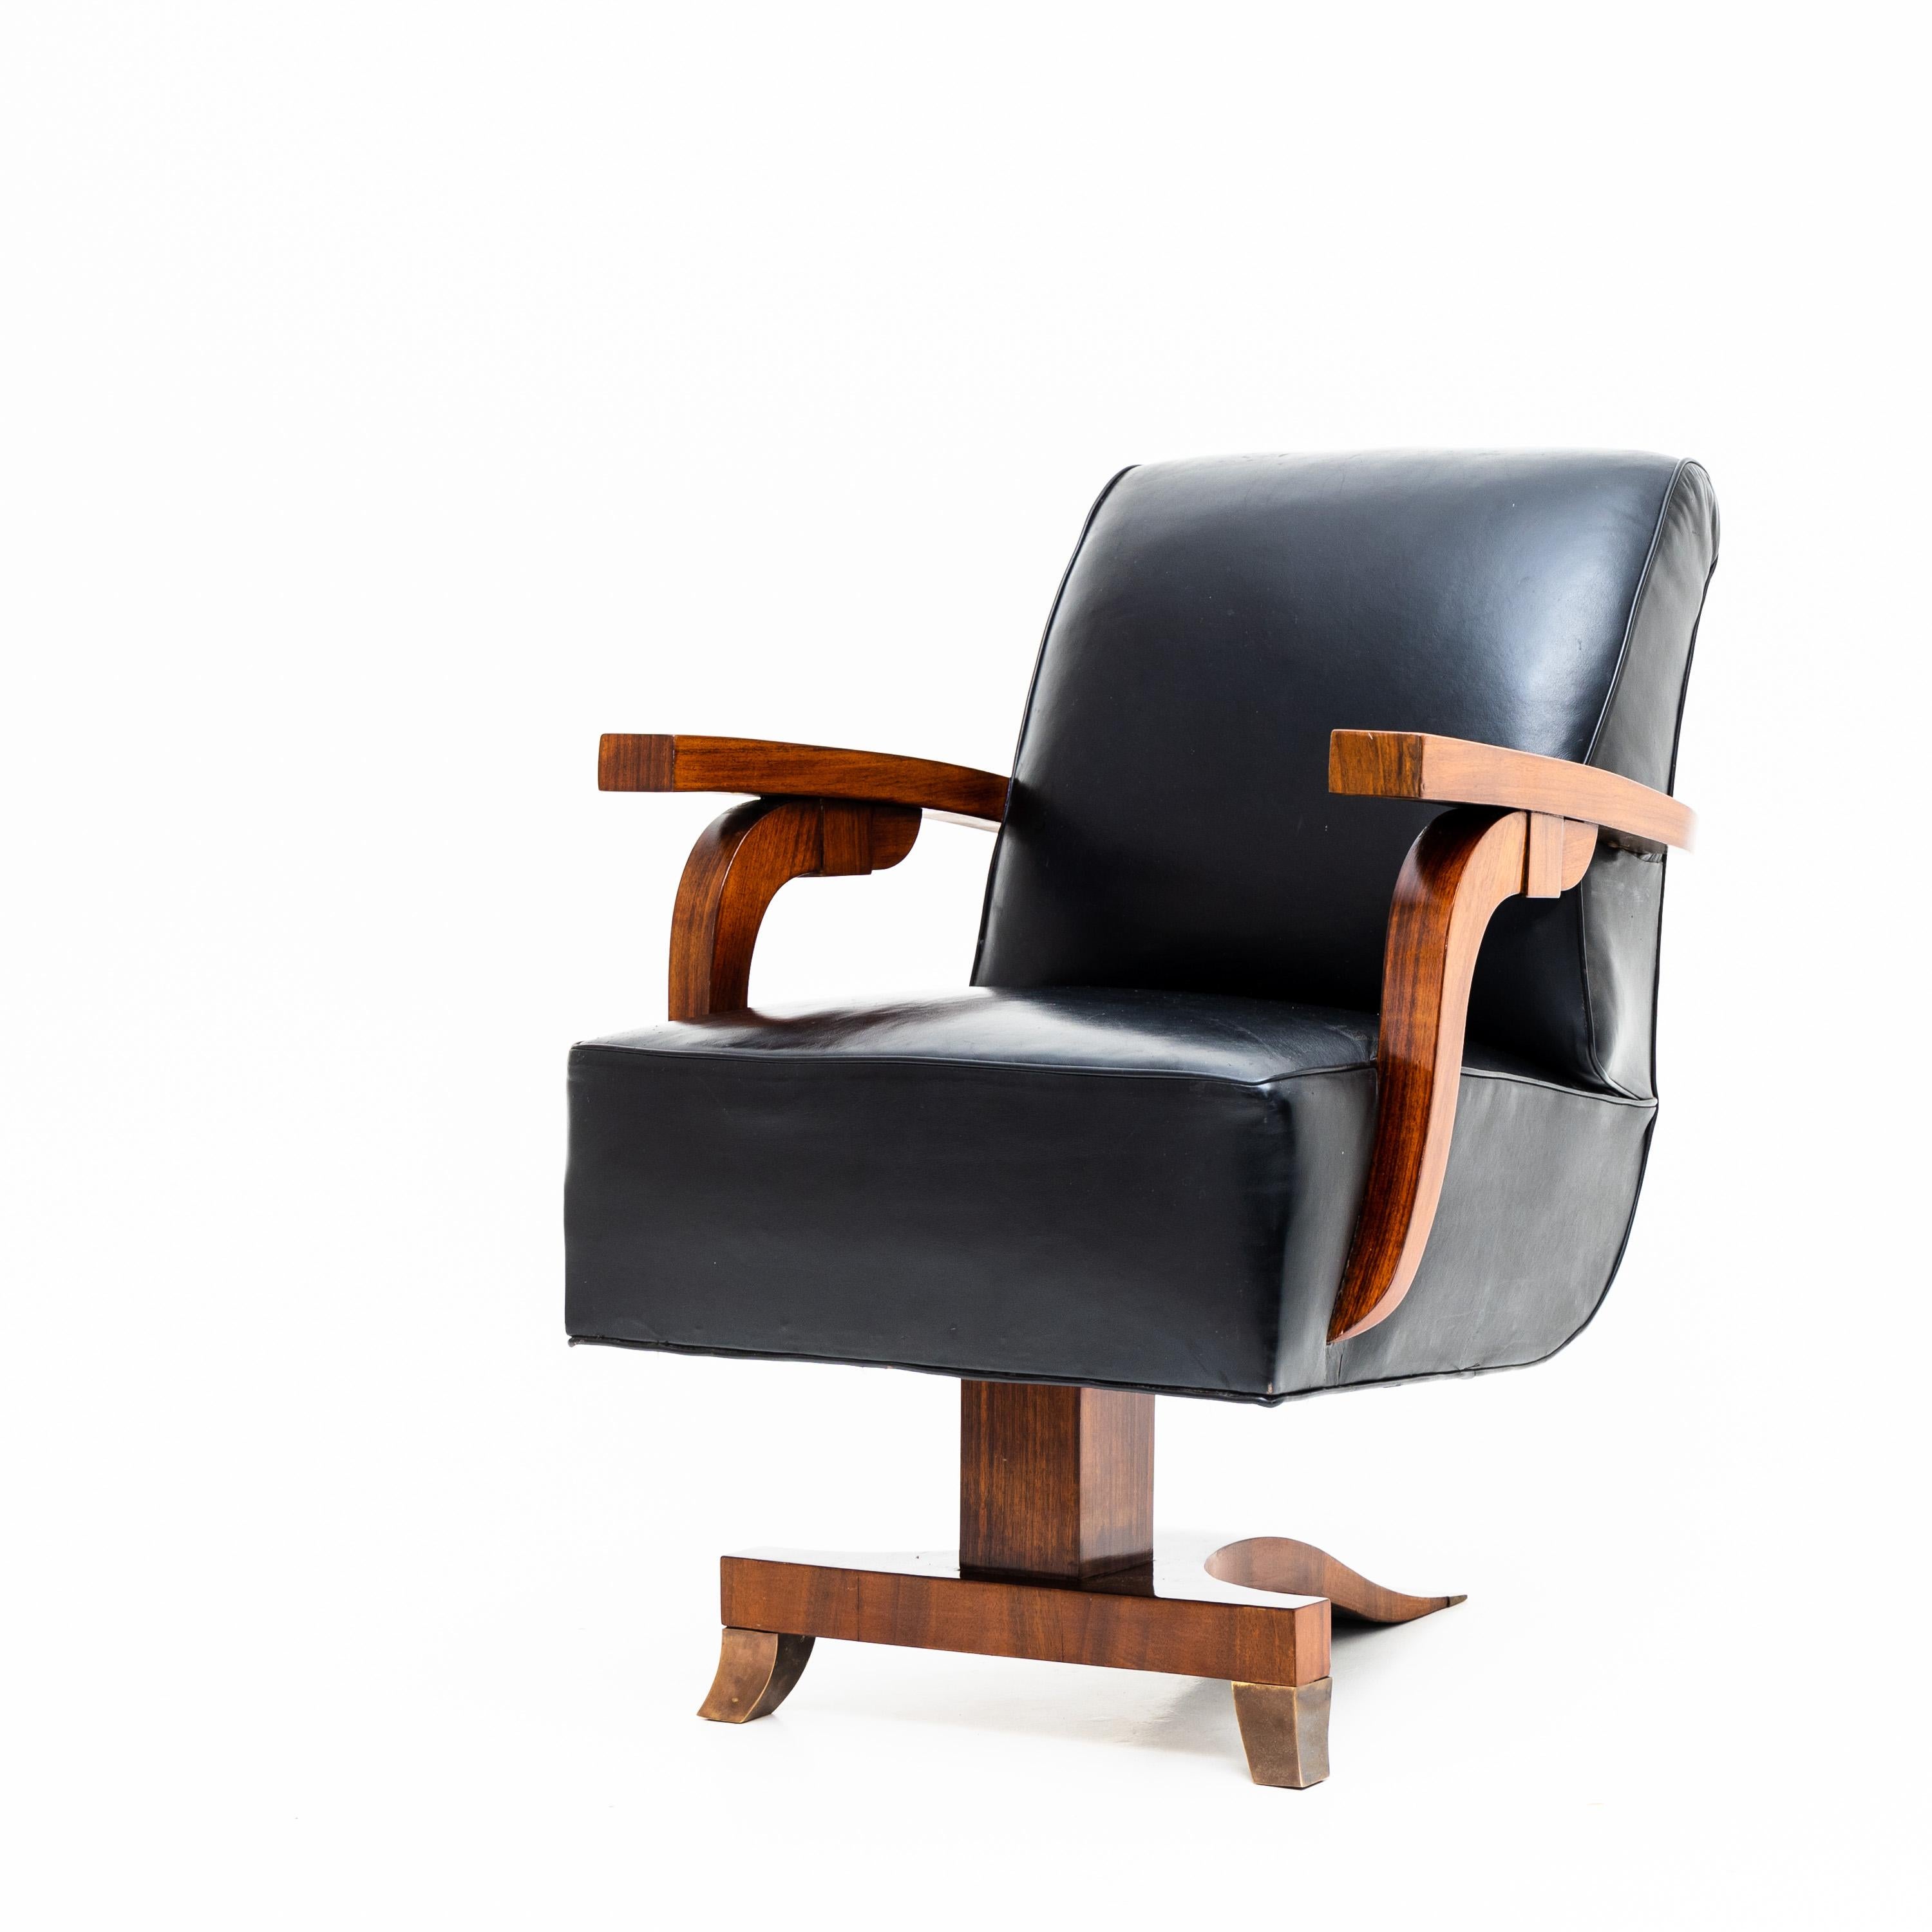 Art Deco lounge chair with leather upholstery and elegantly constructed frame and armrests, veneered in mahogany.